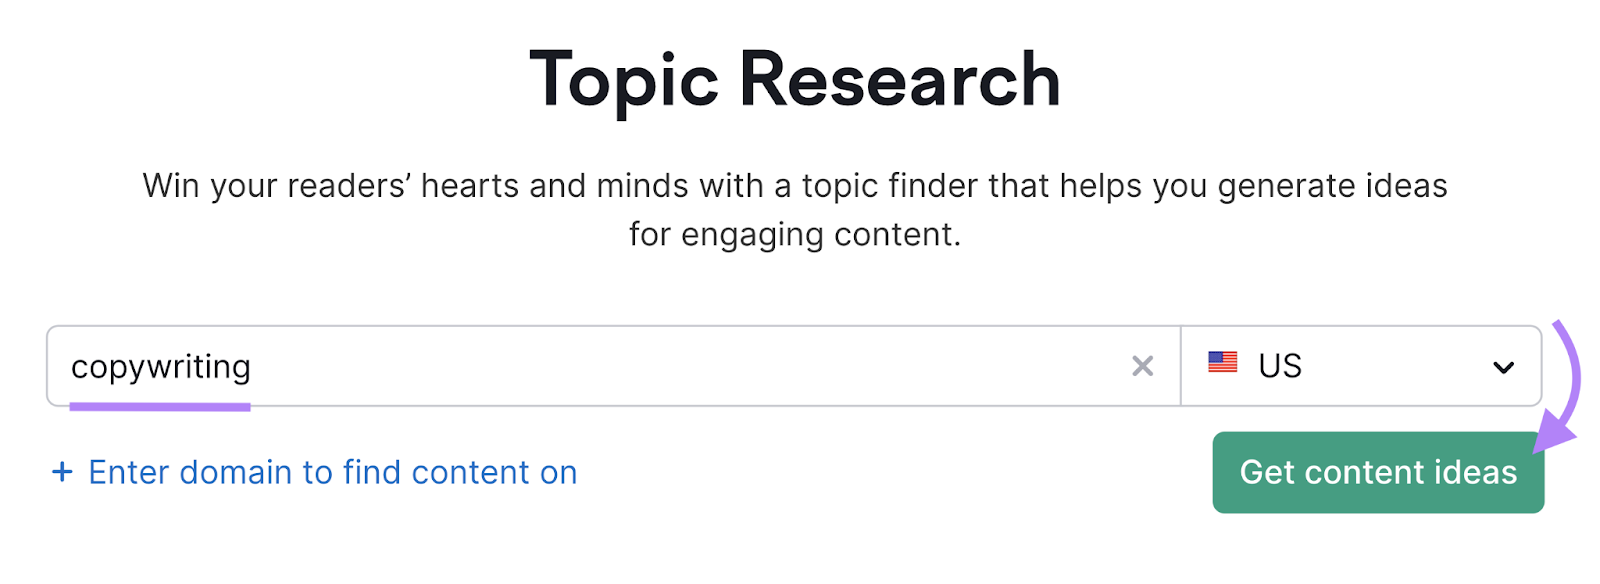 "copywriting" entered into the Topic Research tool search bar